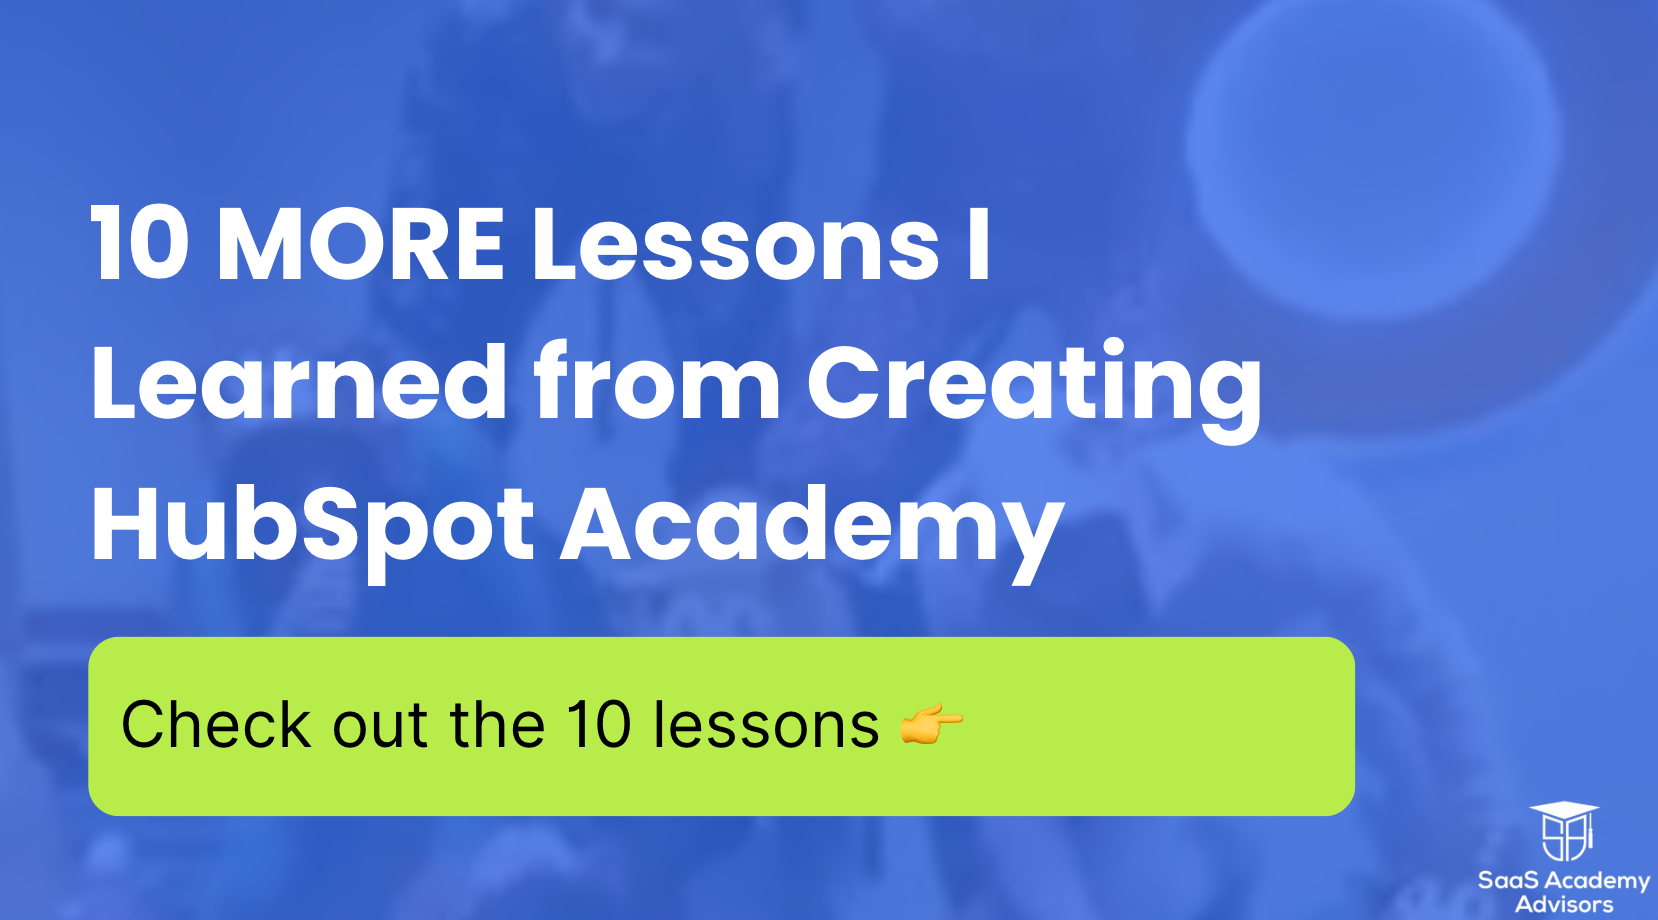 10 MORE Lessons I Learned from Starting, Scaling & Marketing HubSpot Academy